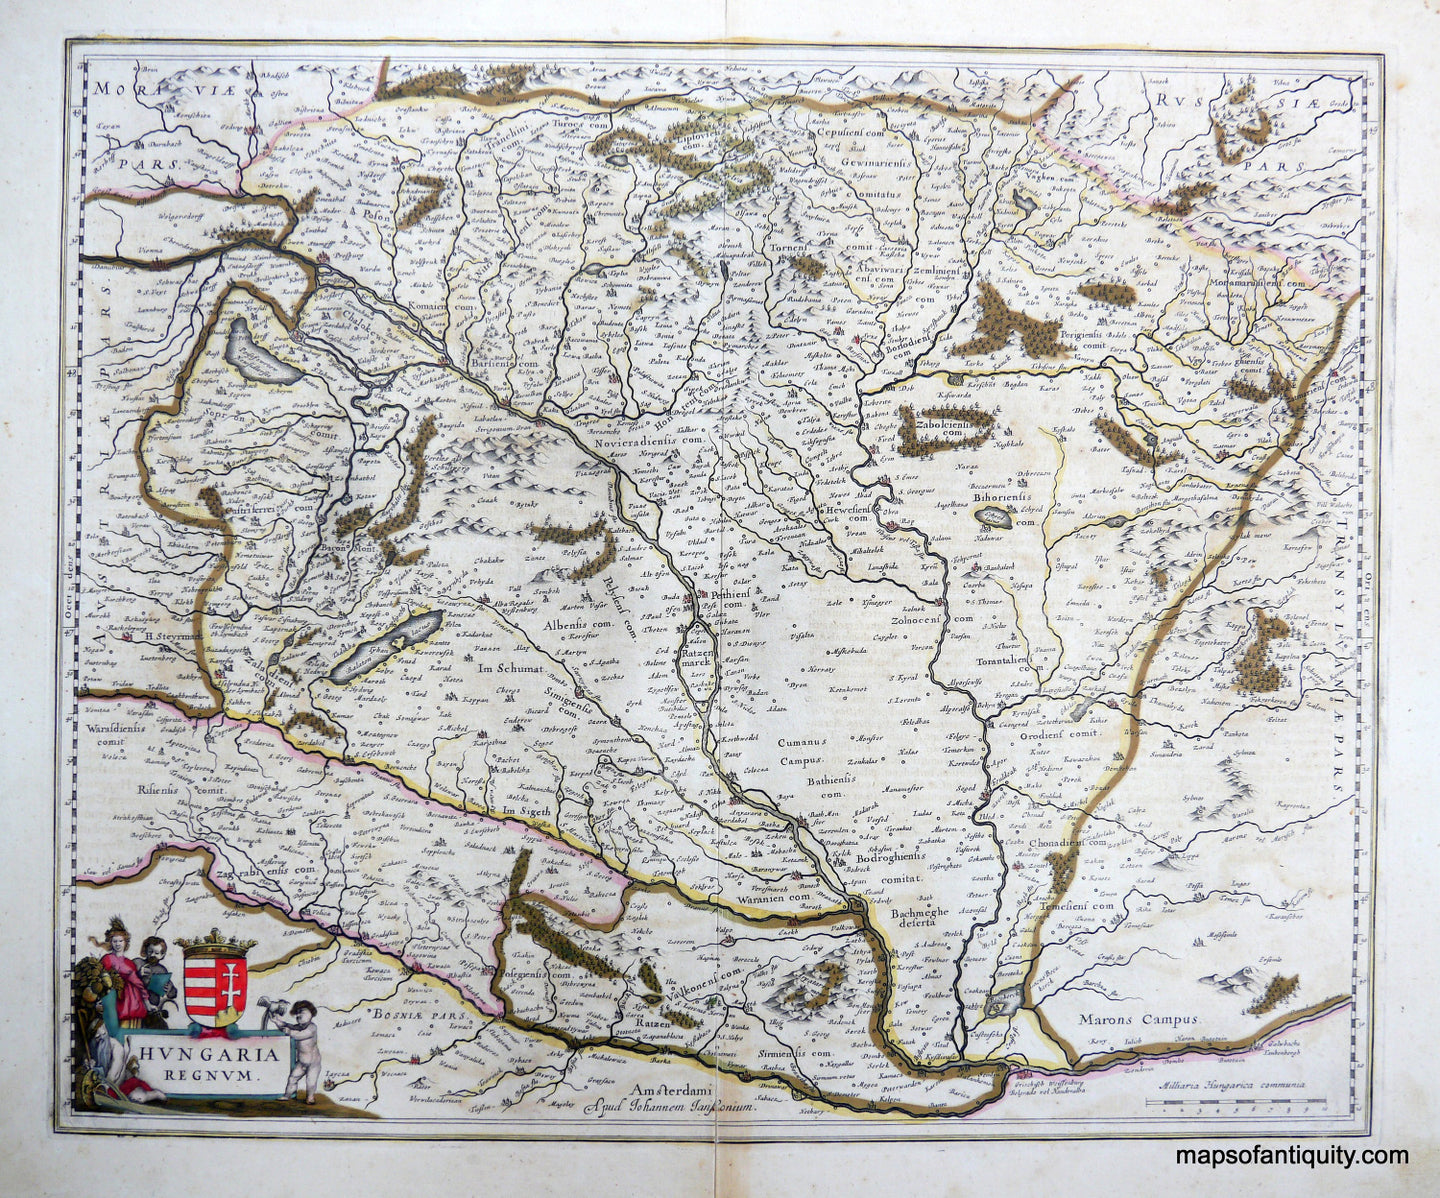 Antique-Hand-Colored-Map-Hungaria-Regnum-**********-Europe-Hungary-c.-1650-Jan-Jansson-Maps-Of-Antiquity